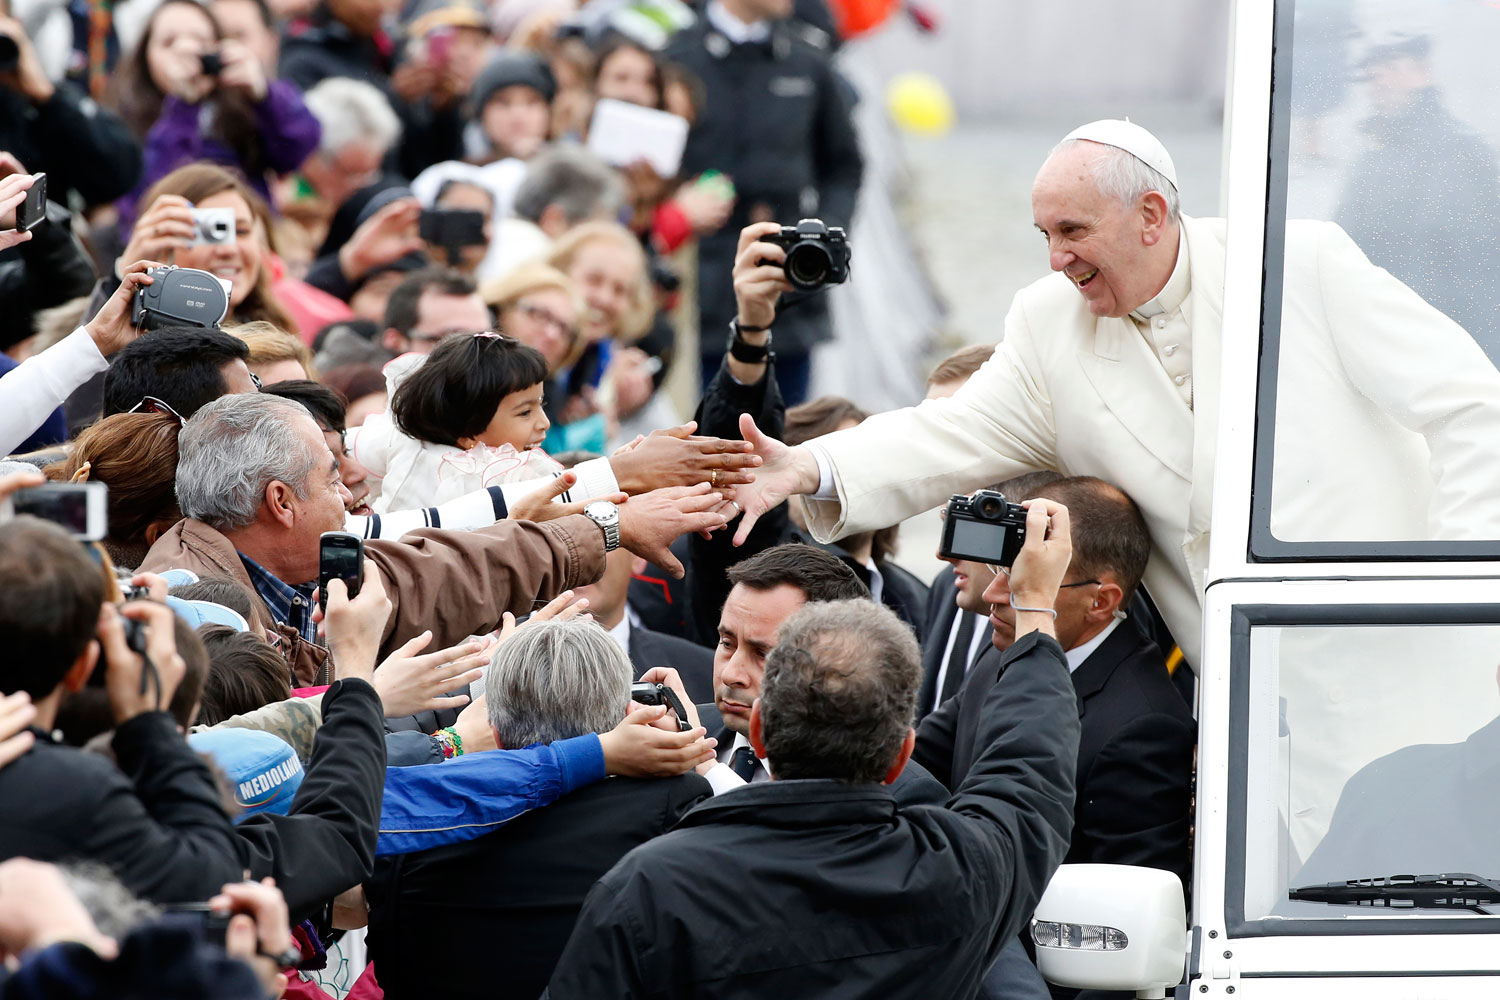 Pope Francis reaches out to greet the faithful as he arrives to lead his Wednesday general audience in Saint Peter's Square at the Vatican March 26, 2014. (Tony Gentile—Reuters)